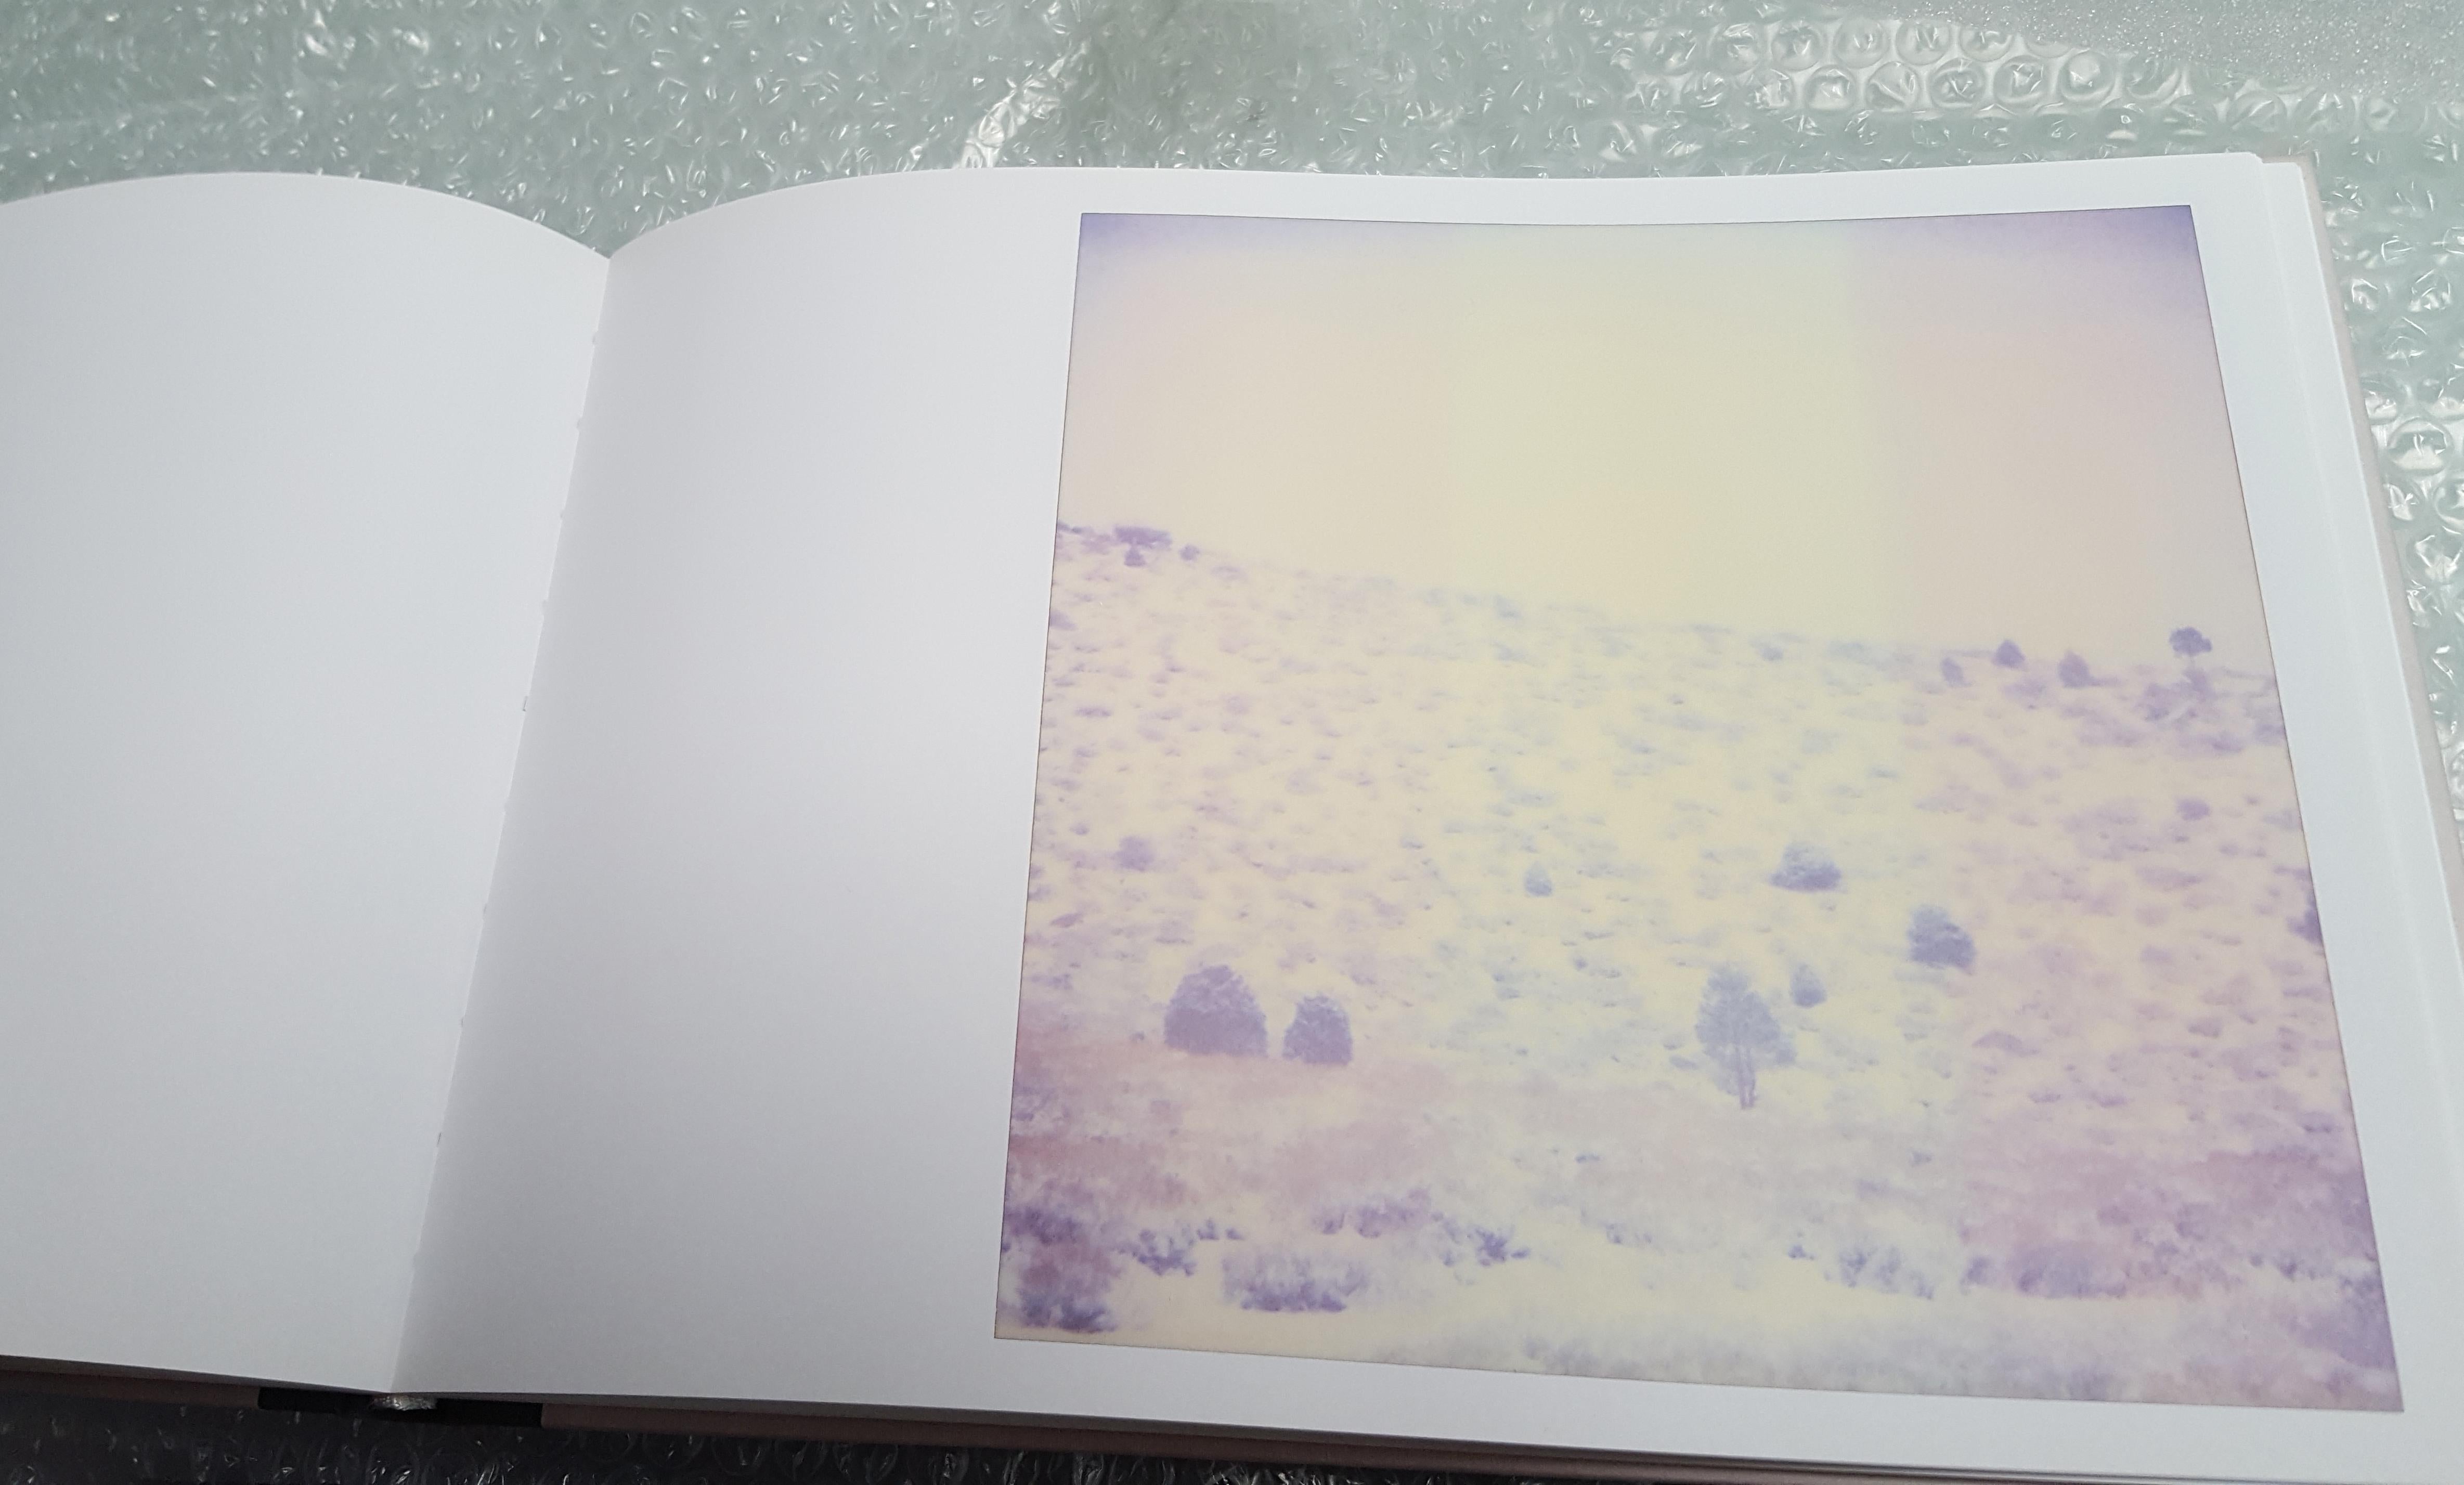 Purple Valley (Wastelands) - 2003

57x56cm, 
Edition 3/5. 
Analog C-Print, hand-printed by the artist on Fuji Crystal Archive Paper, based on the Polaroid. 
Mounted on Aluminum with matte UV-Protection. 
Artist inventory Number 645.01. 
Signed on